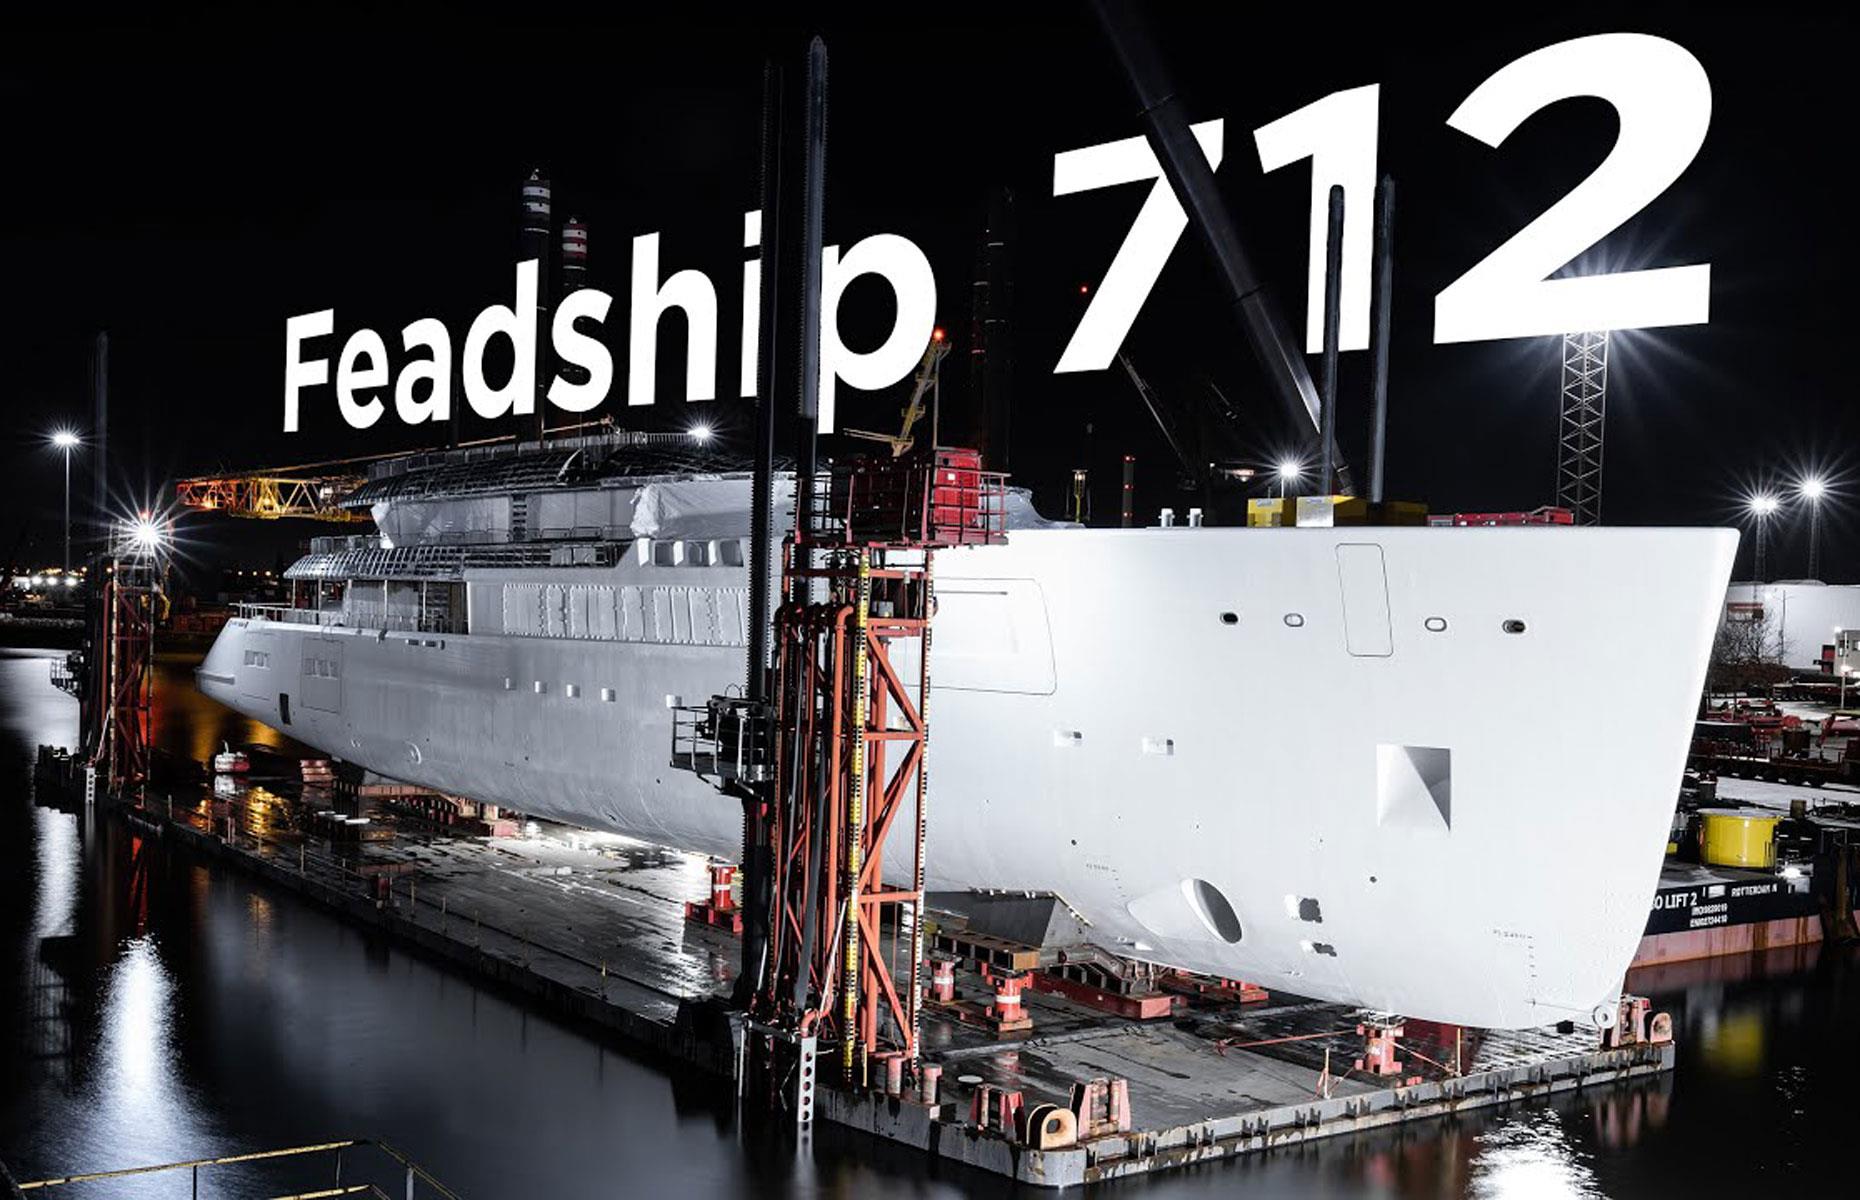 <p>Feadship is practically churning out superyachts at the moment, with multiple deliveries scheduled this year. <em>Project 712 </em>is among them.</p>  <p>The 272-foot vessel features an exterior design by Feadship's De Voogt Naval Architects. Unlike the aforementioned<em> Project 825</em>, however, the interiors are the work of top Dutch firm Sinot Yacht Architecture & Design, not French studio Gilles & Boissier.</p>